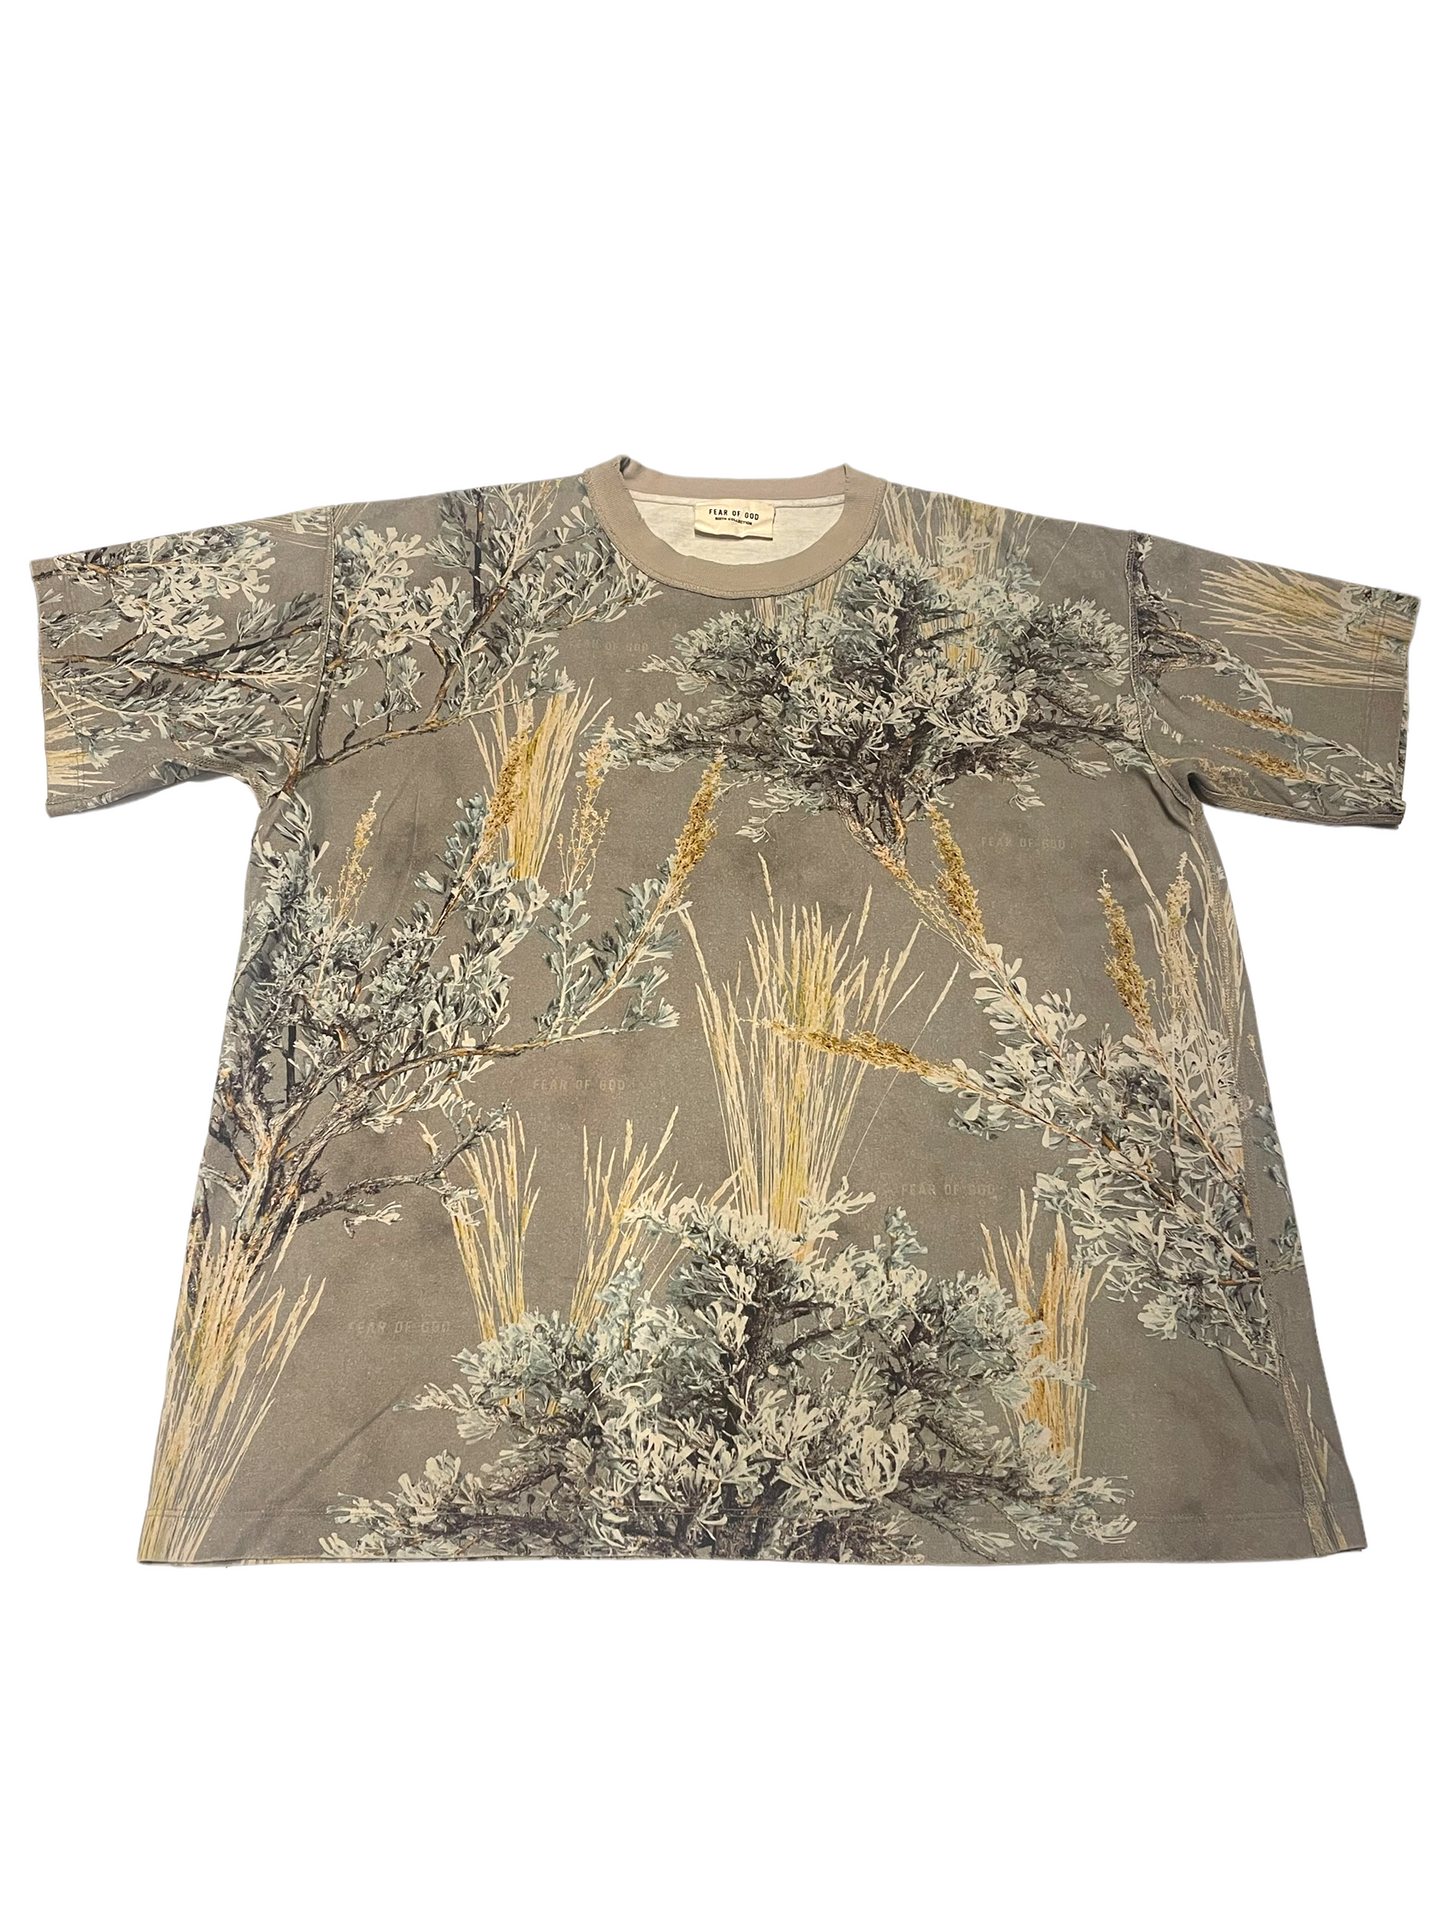 FEAR OF GOD  6th collection Floral T-shirt